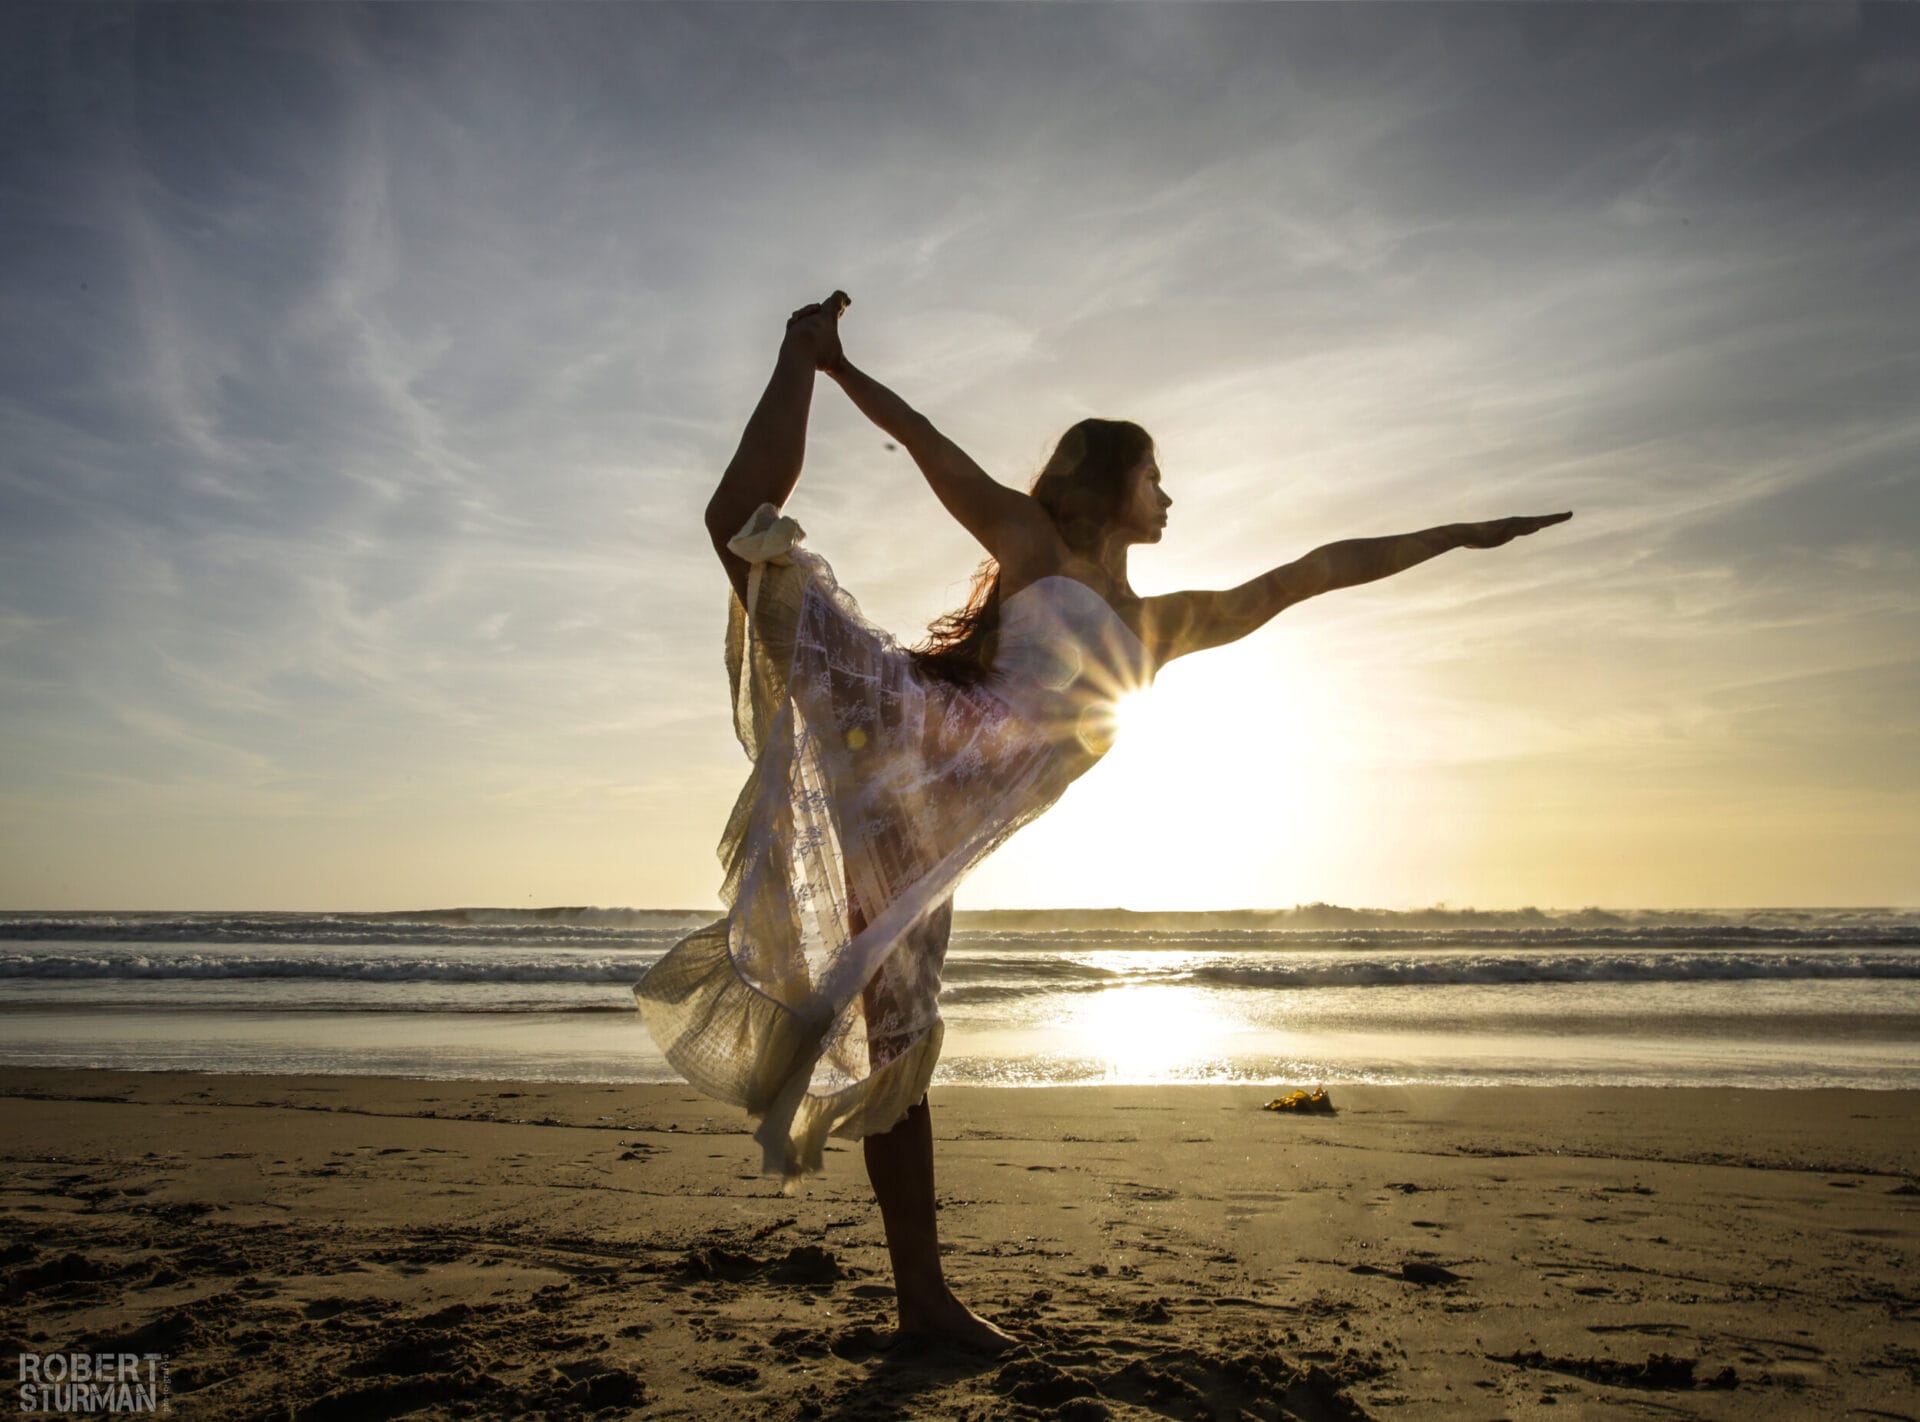 A person performing a yoga pose on the beach at sunset.